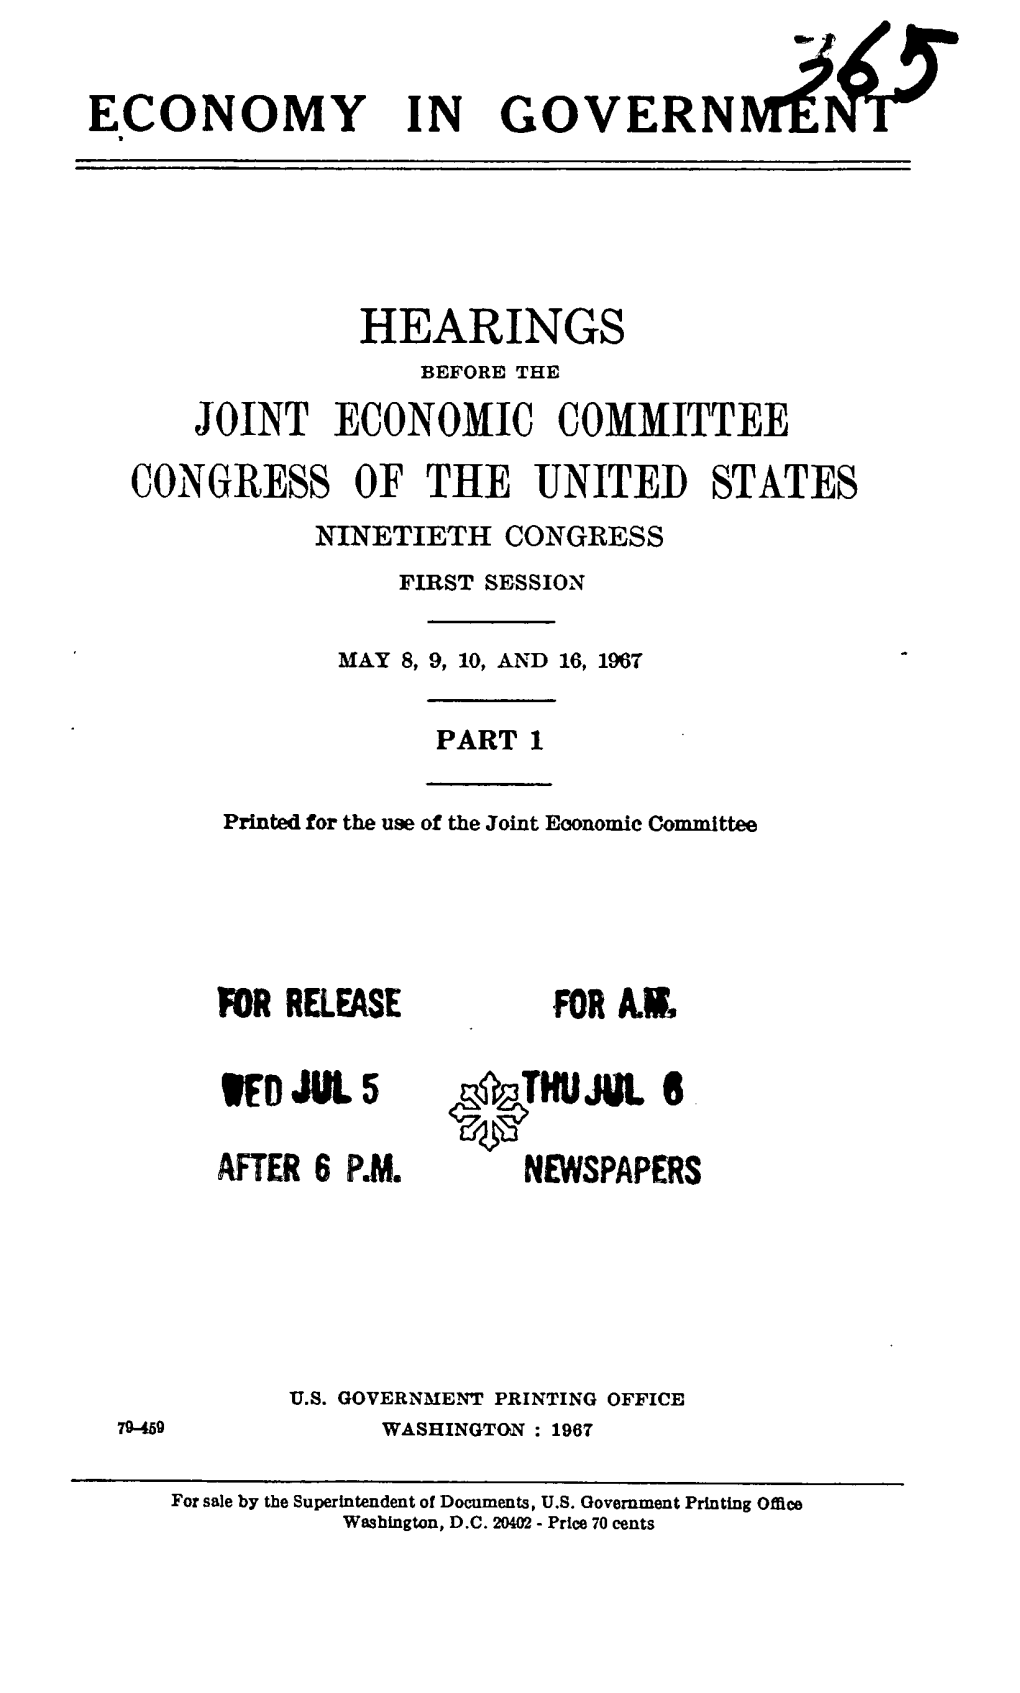 Economy in Governm' Hearings Joint Economic